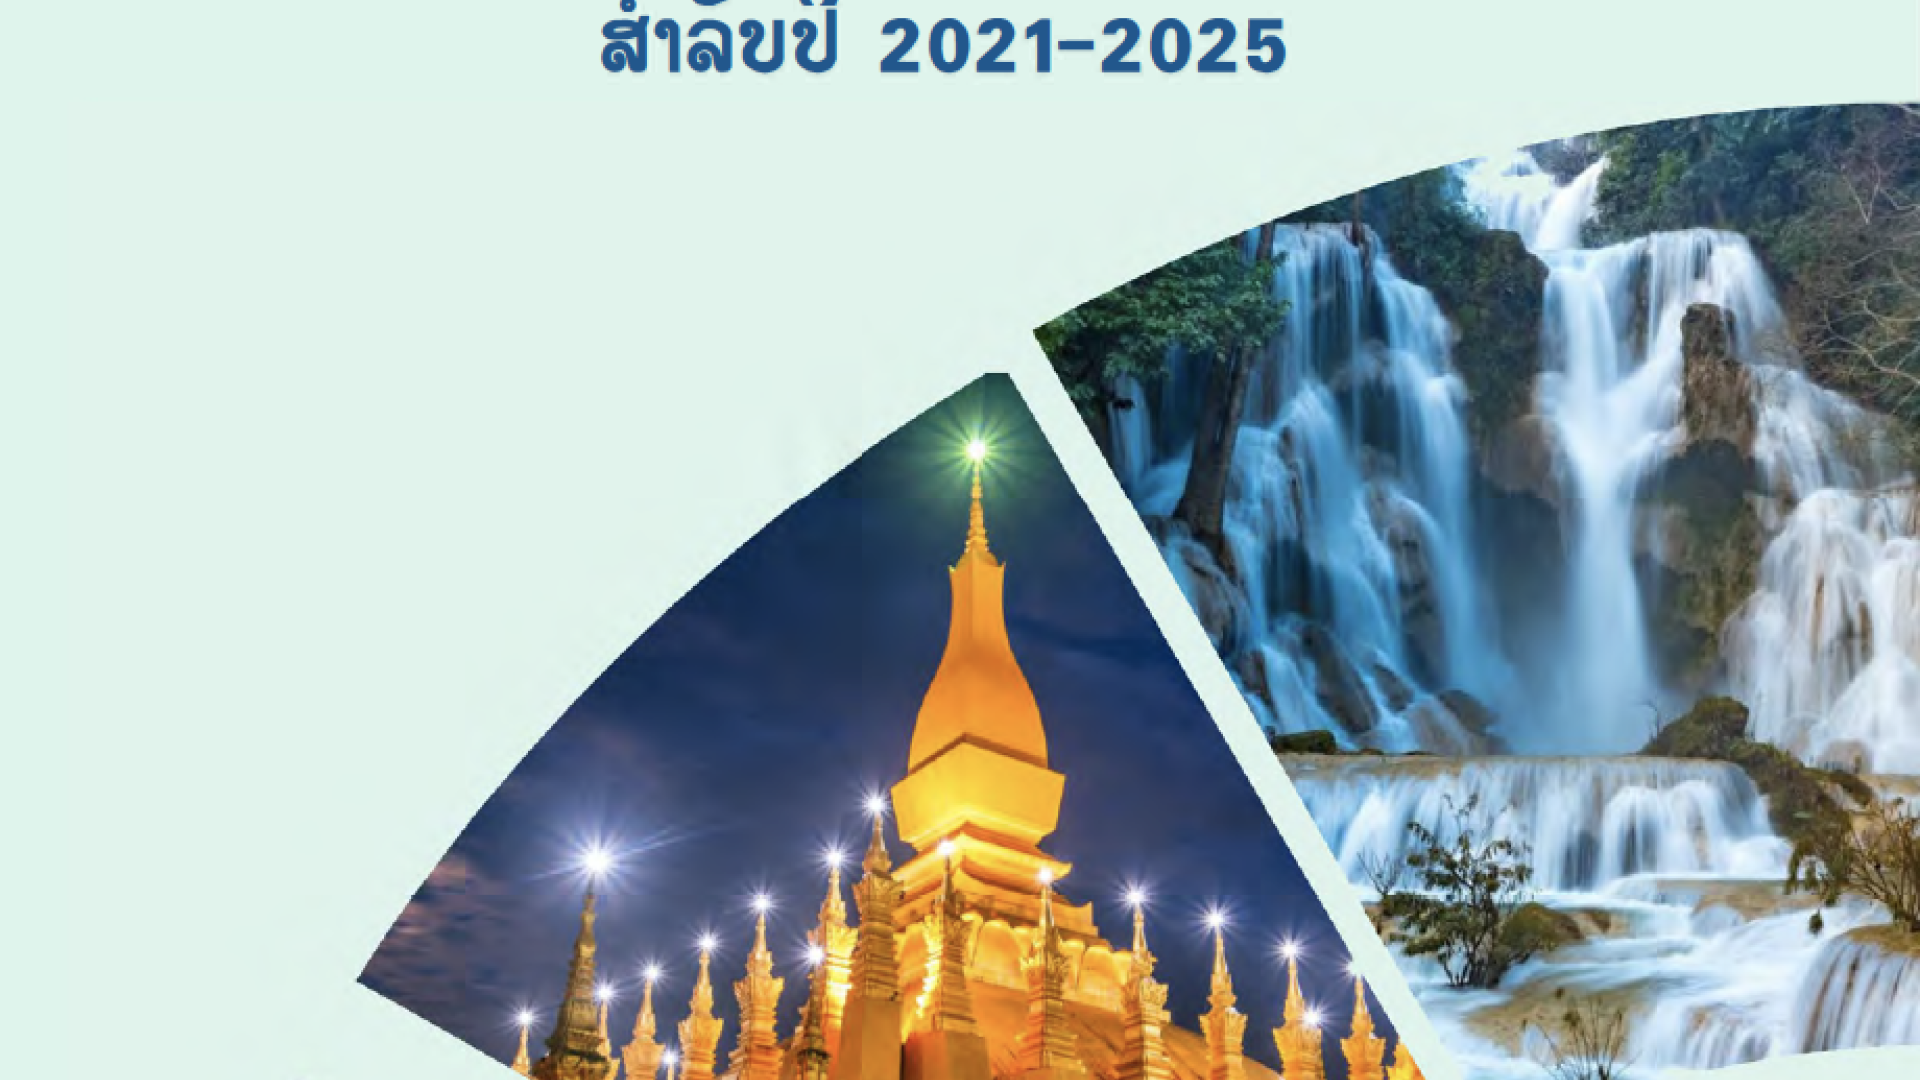 lao tourism industry